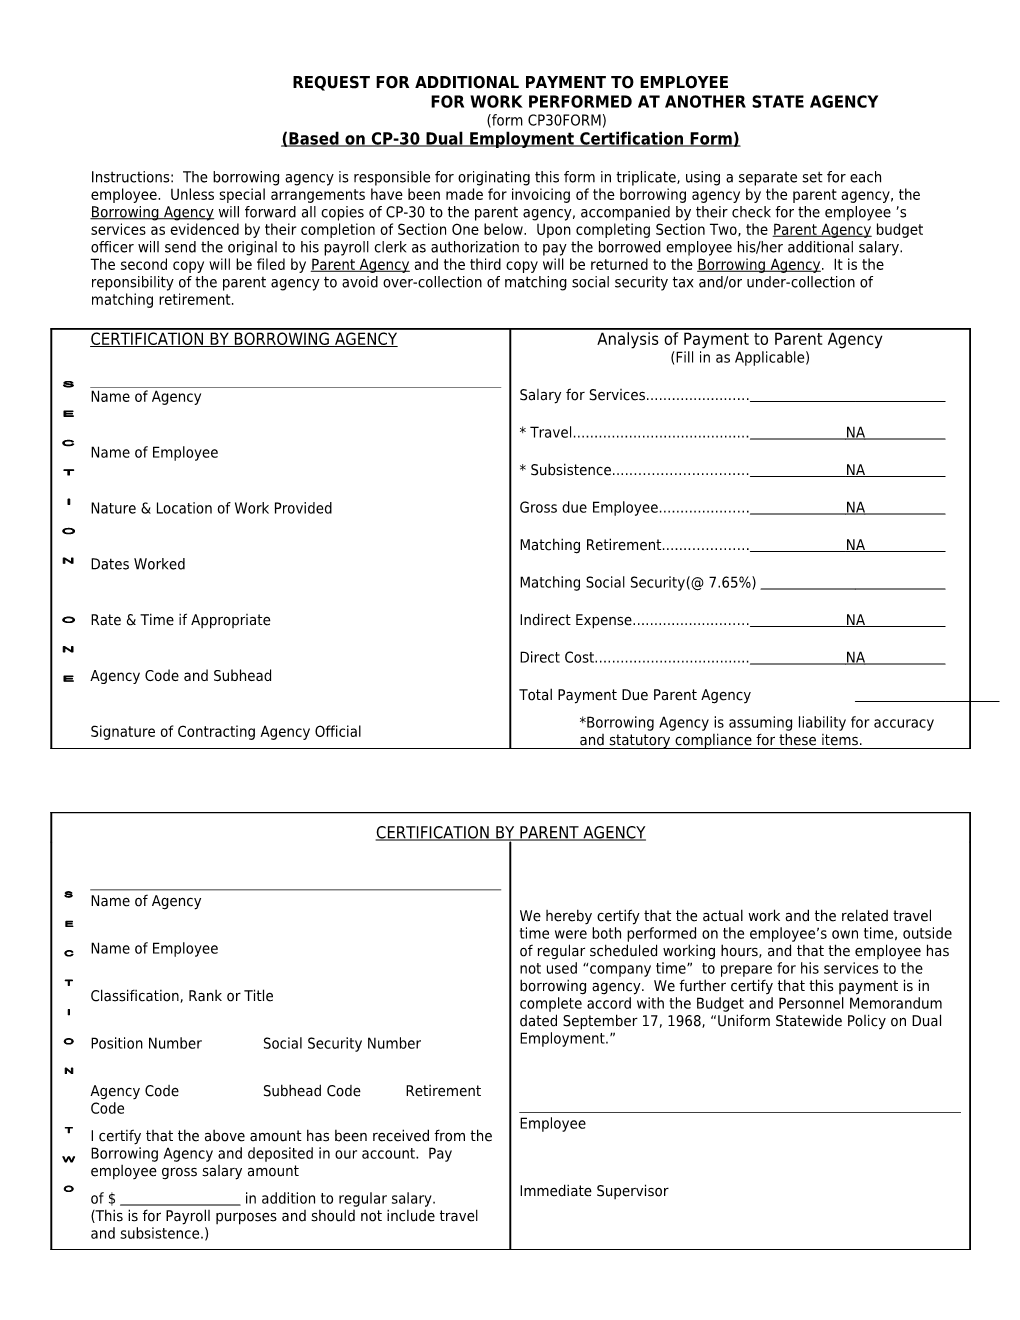 Based on Cp-30 Dual Employment Cerification Form (Revised 7-1-69)